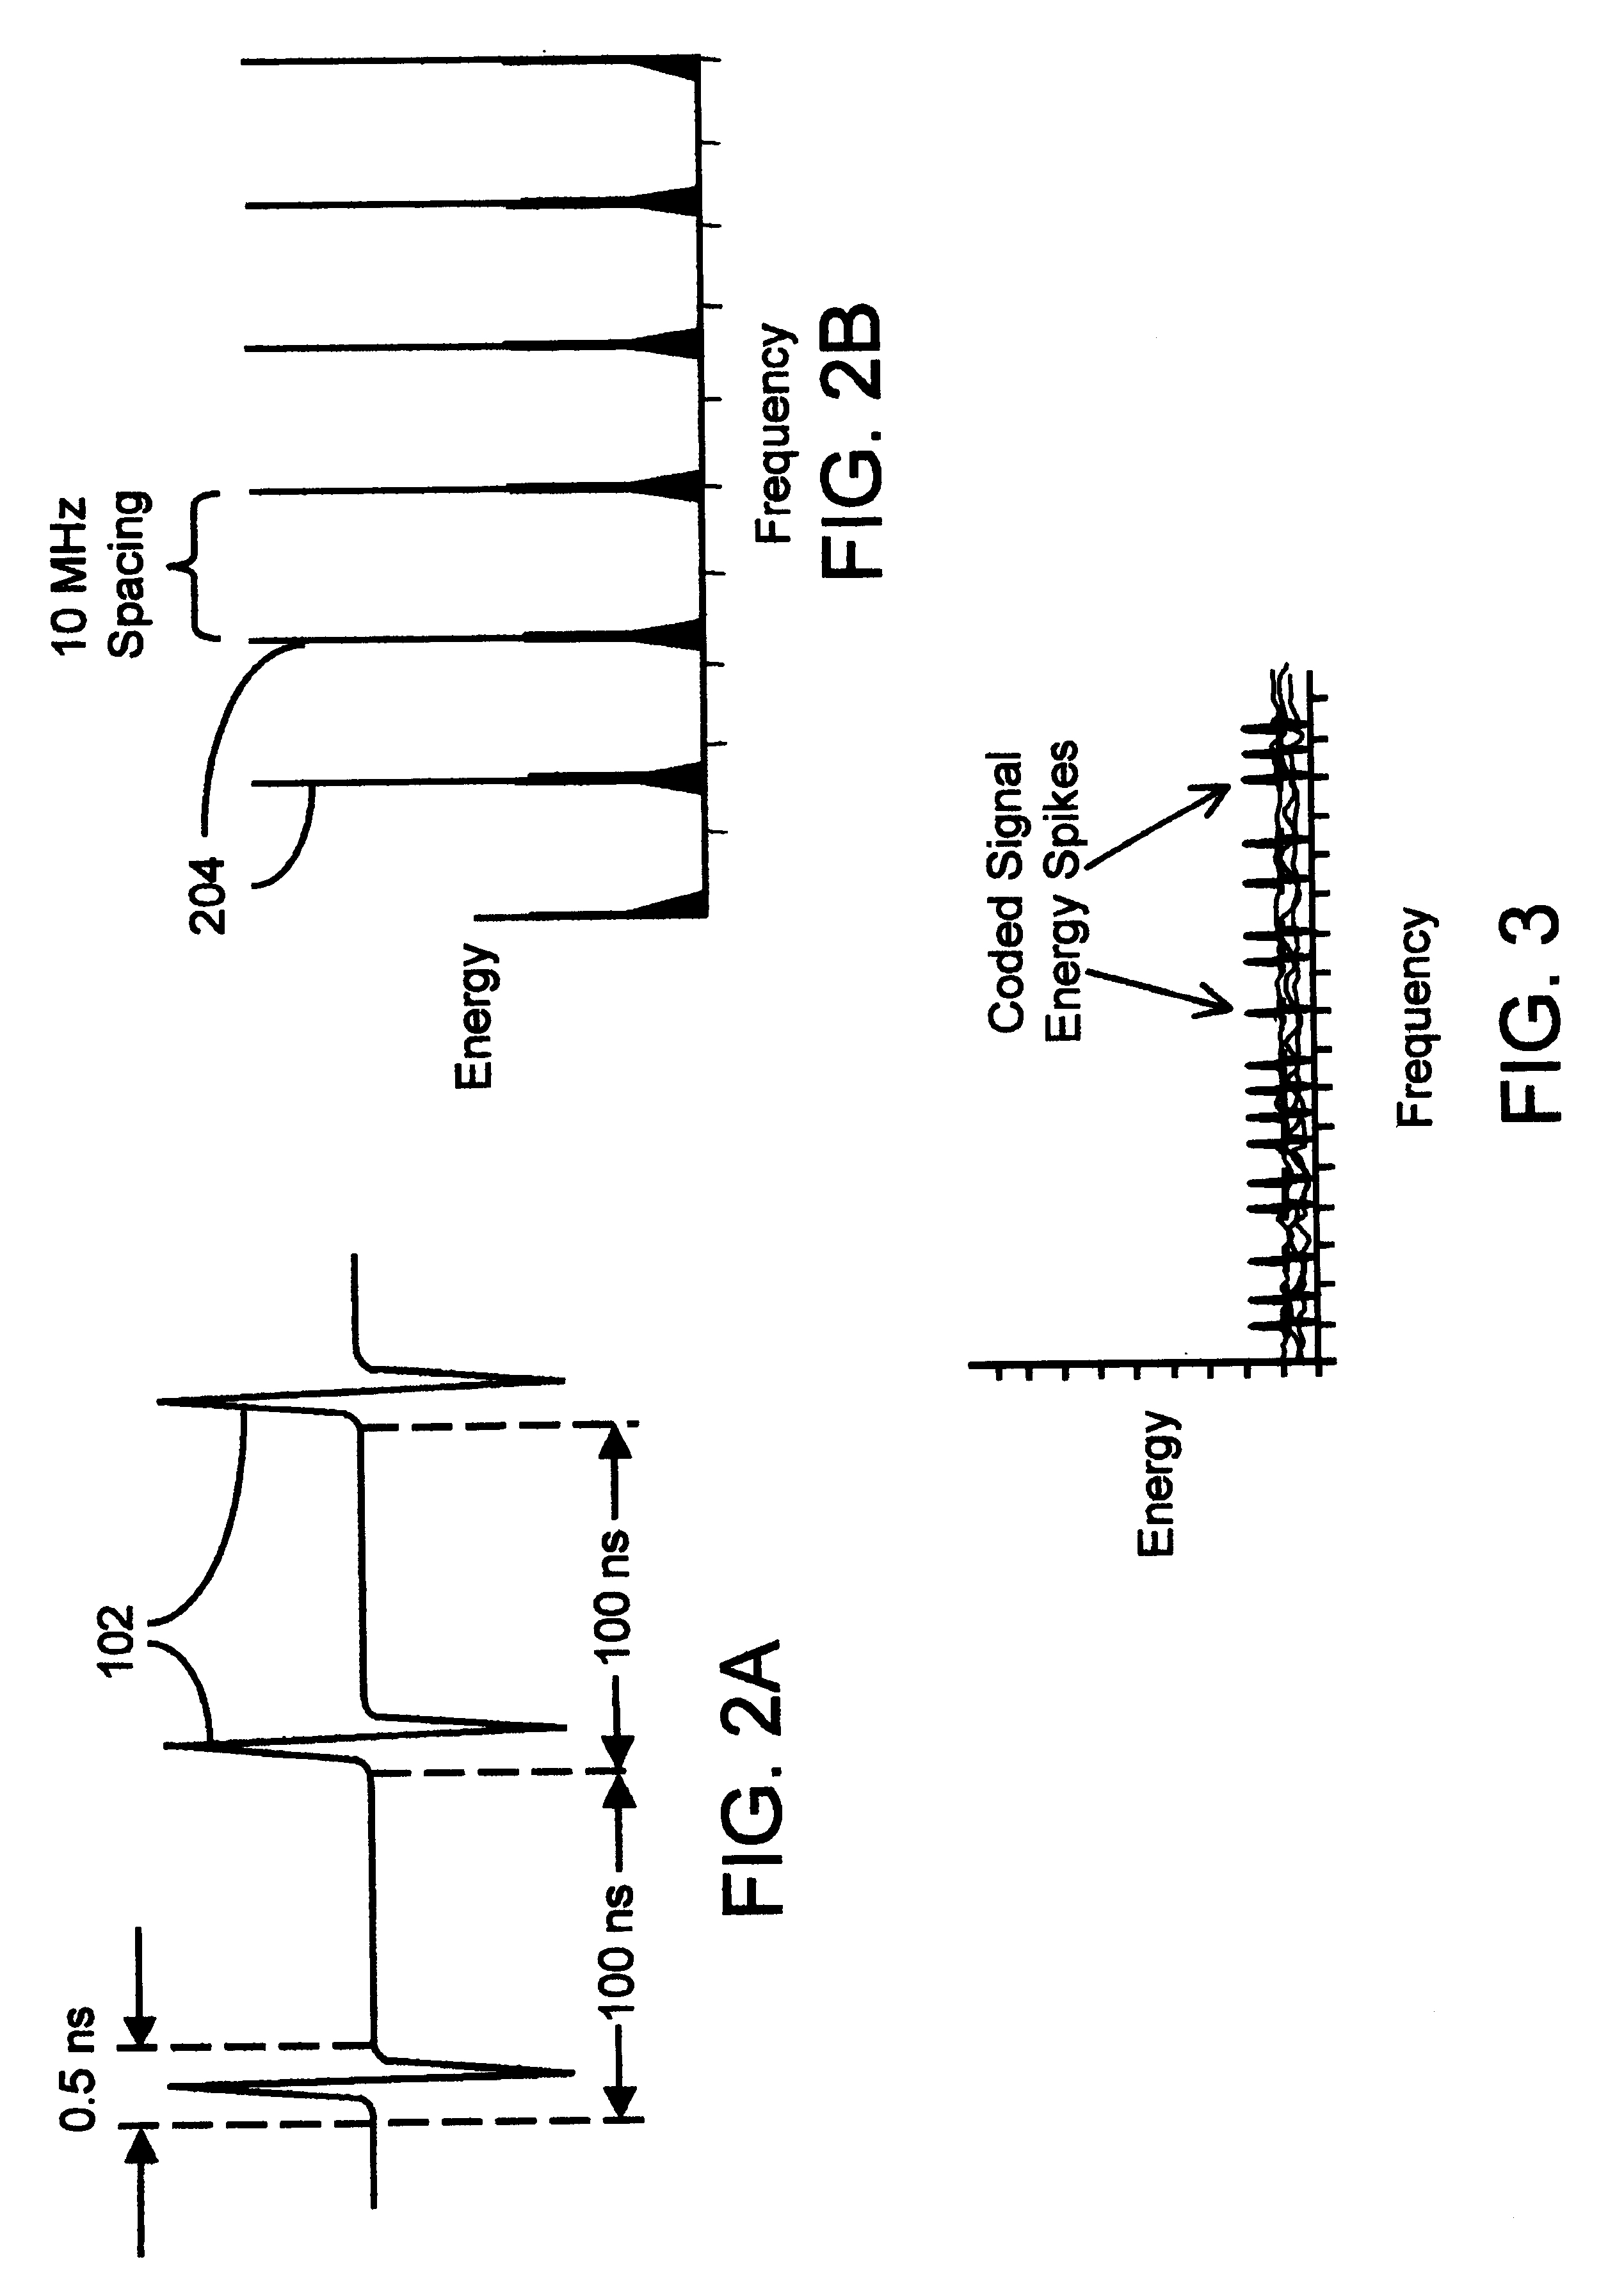 Apparatus for establishing signal coupling between a signal line and an antenna structure